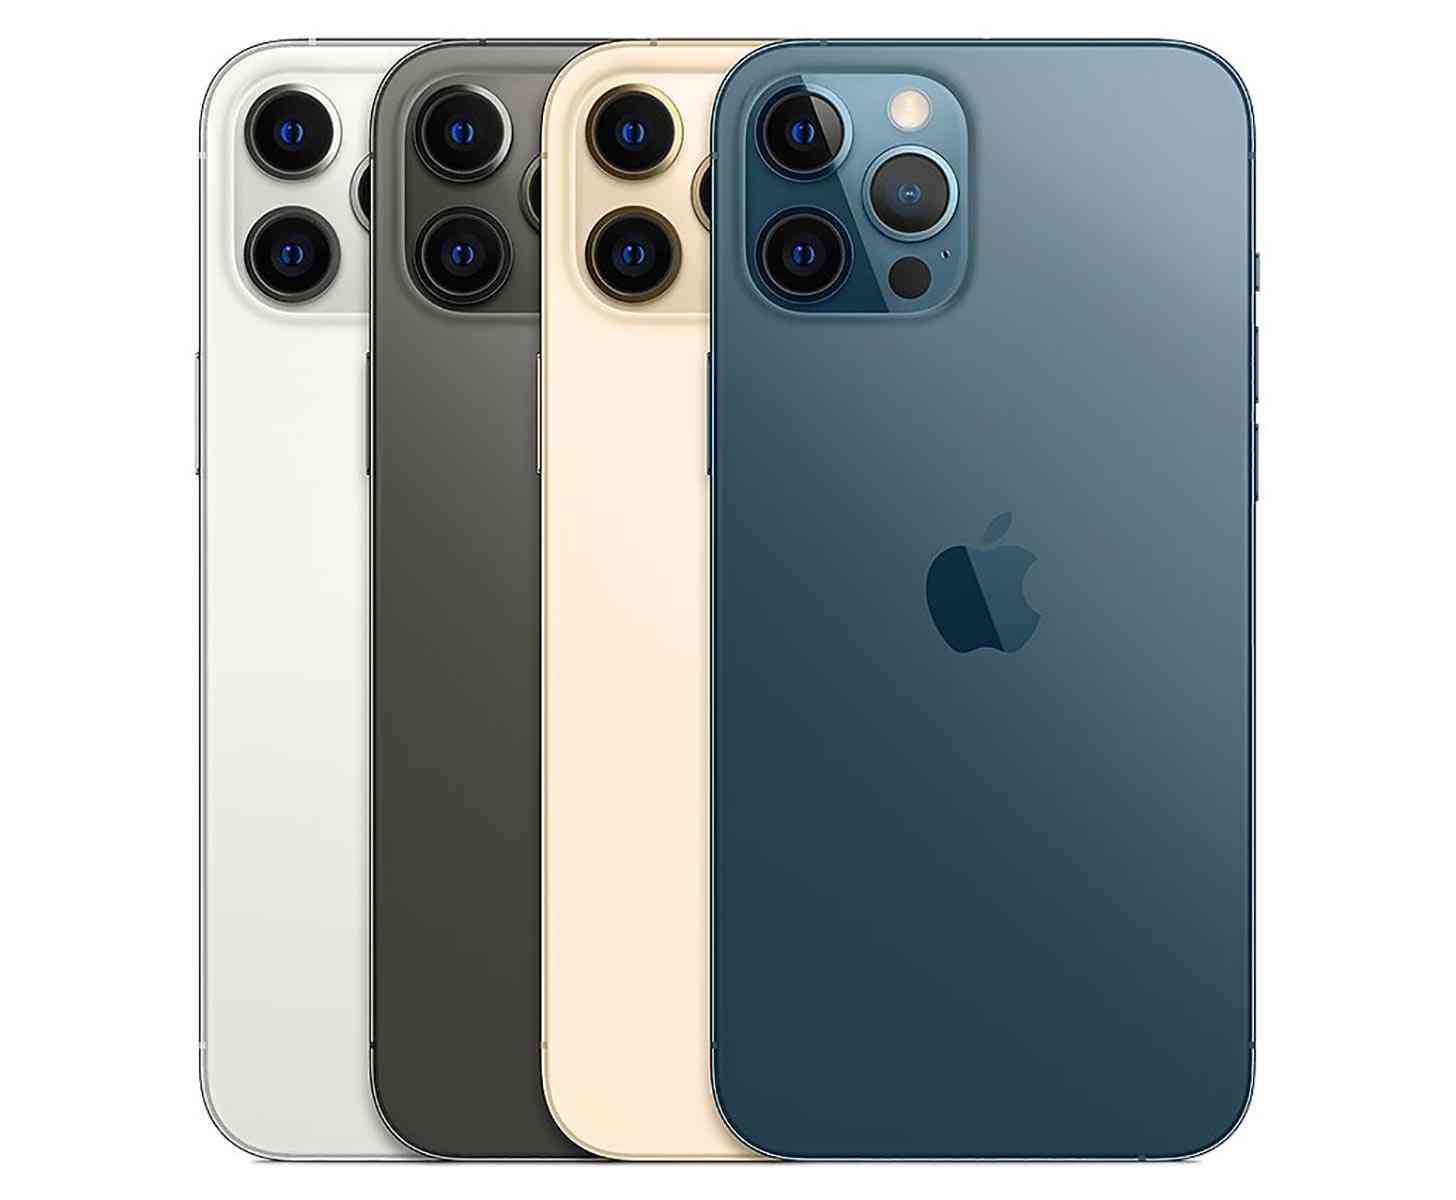 iPhone 12 Pro colors